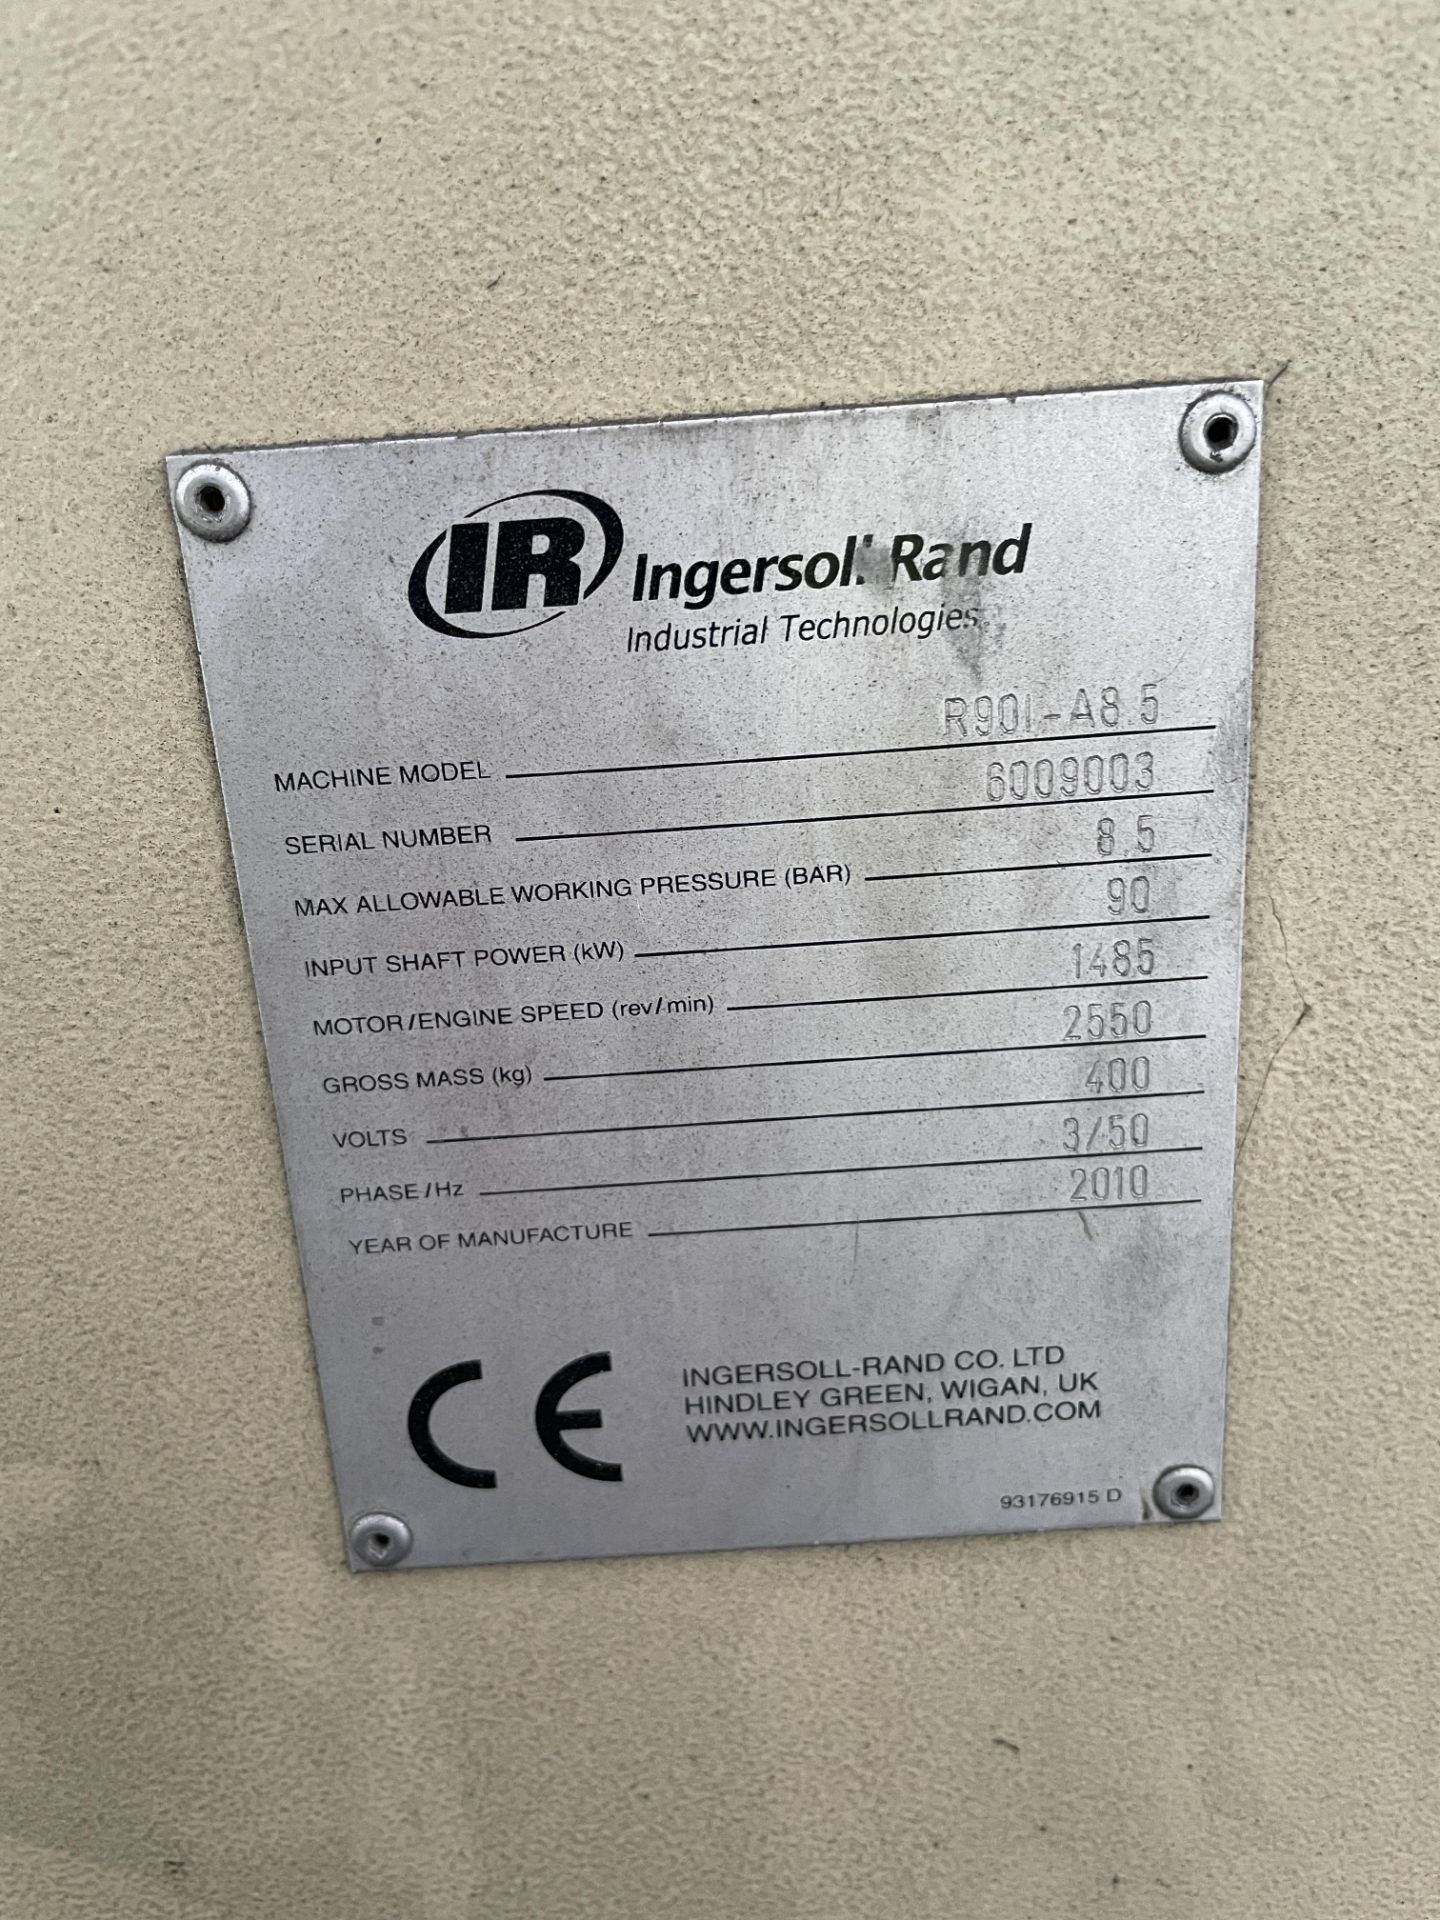 Ingersoll Rand R90I-A8.5 Packaged Air Compressor, serial no. 6009003, year of manufacture 2010, 8. - Image 3 of 3